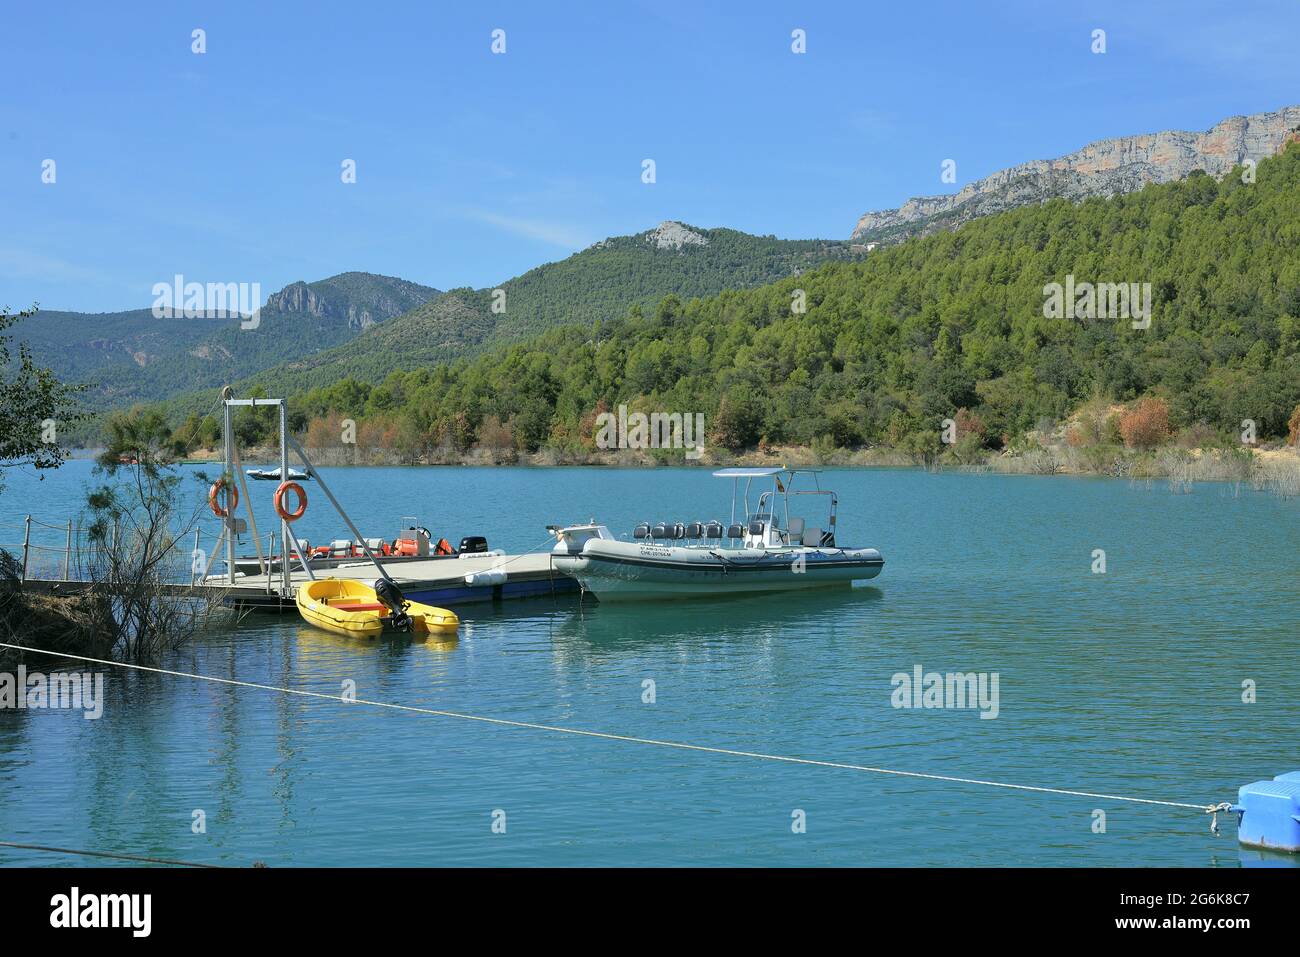 Cañelles reservoir located in the province of Lerida, Catalonia-Spain Stock Photo